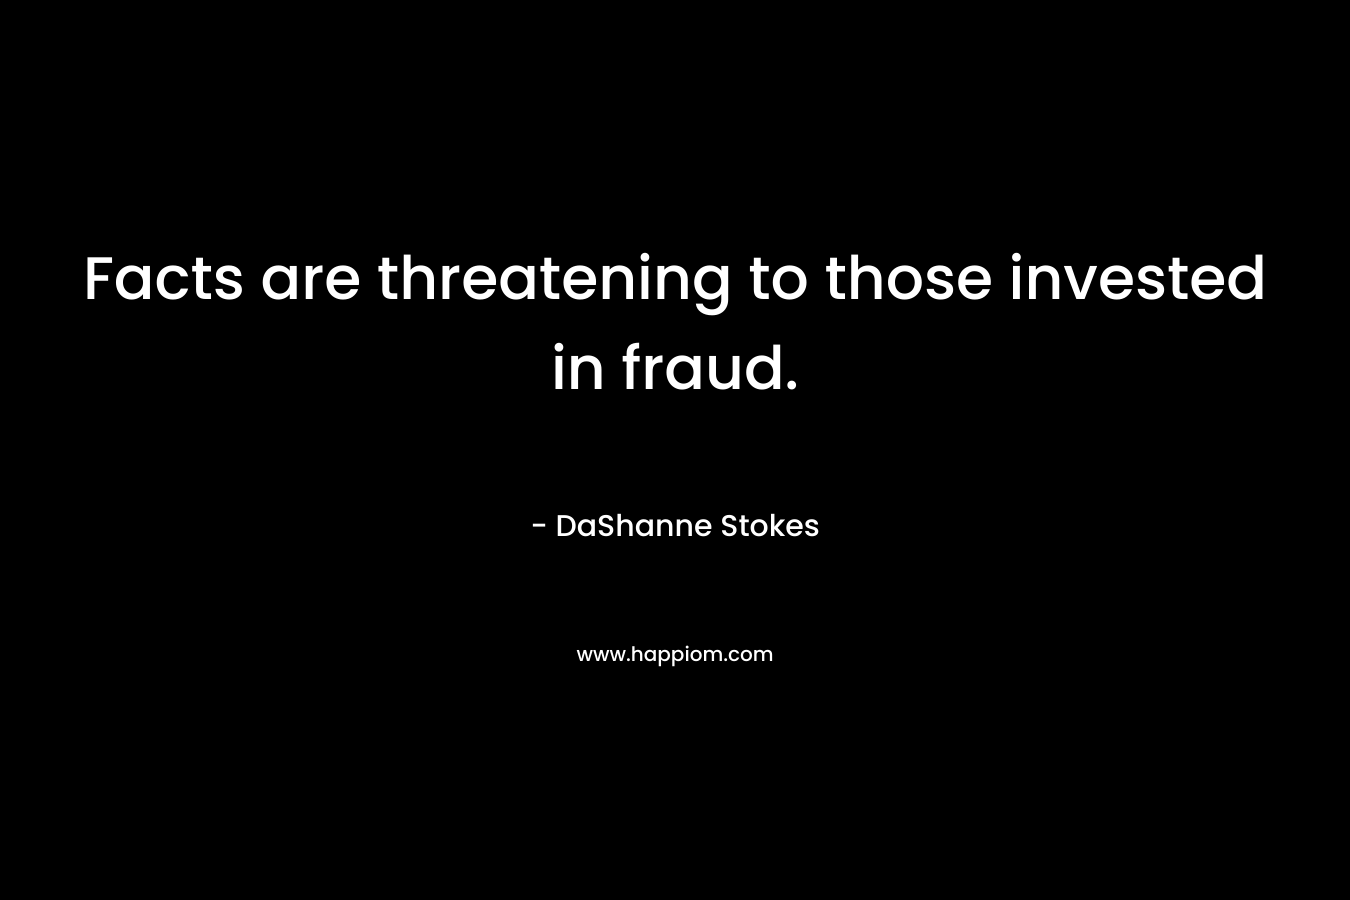 Facts are threatening to those invested in fraud. – DaShanne Stokes